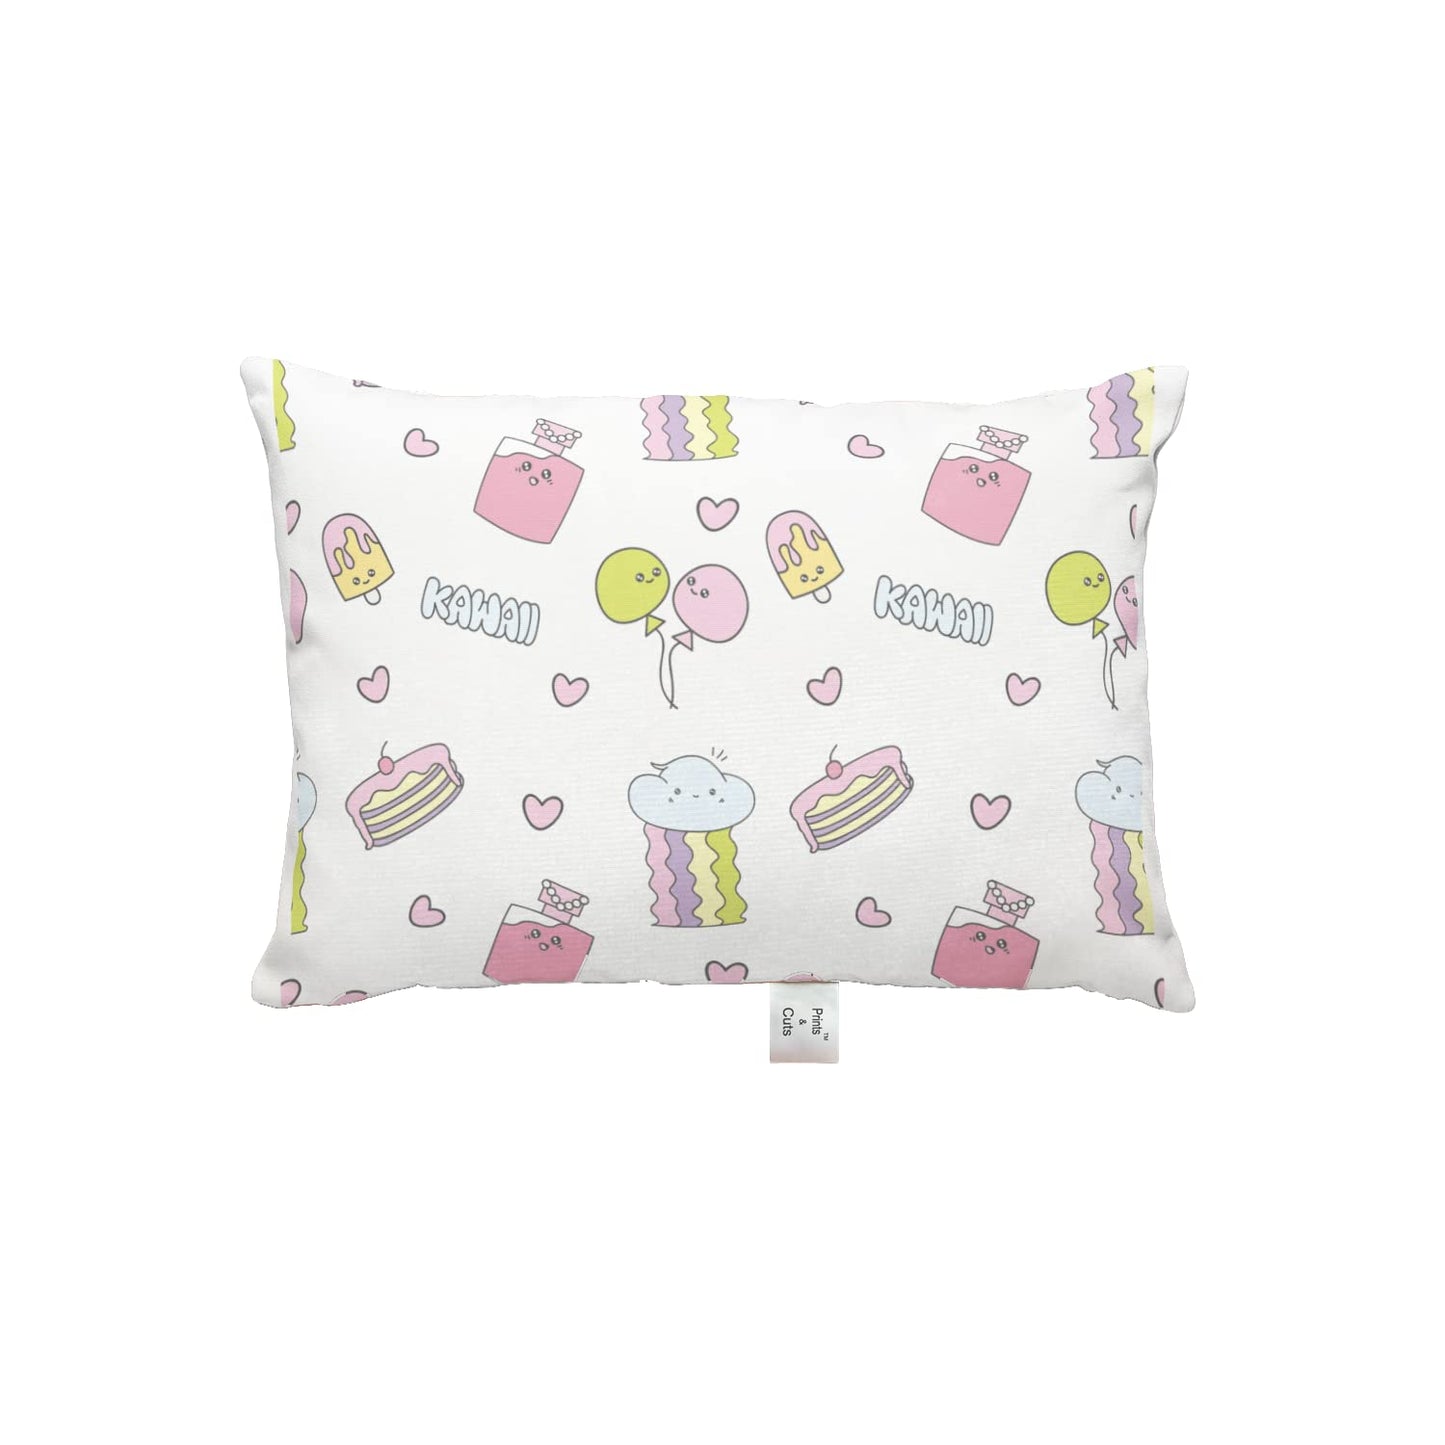 Prints and Cuts Toddler/Baby/New Born Pillow with Extra Soft Pillow Cover - Baby Emoji - 9" x 12" - Baby Pillow for Bedding, Bed Set - (Set of 1)